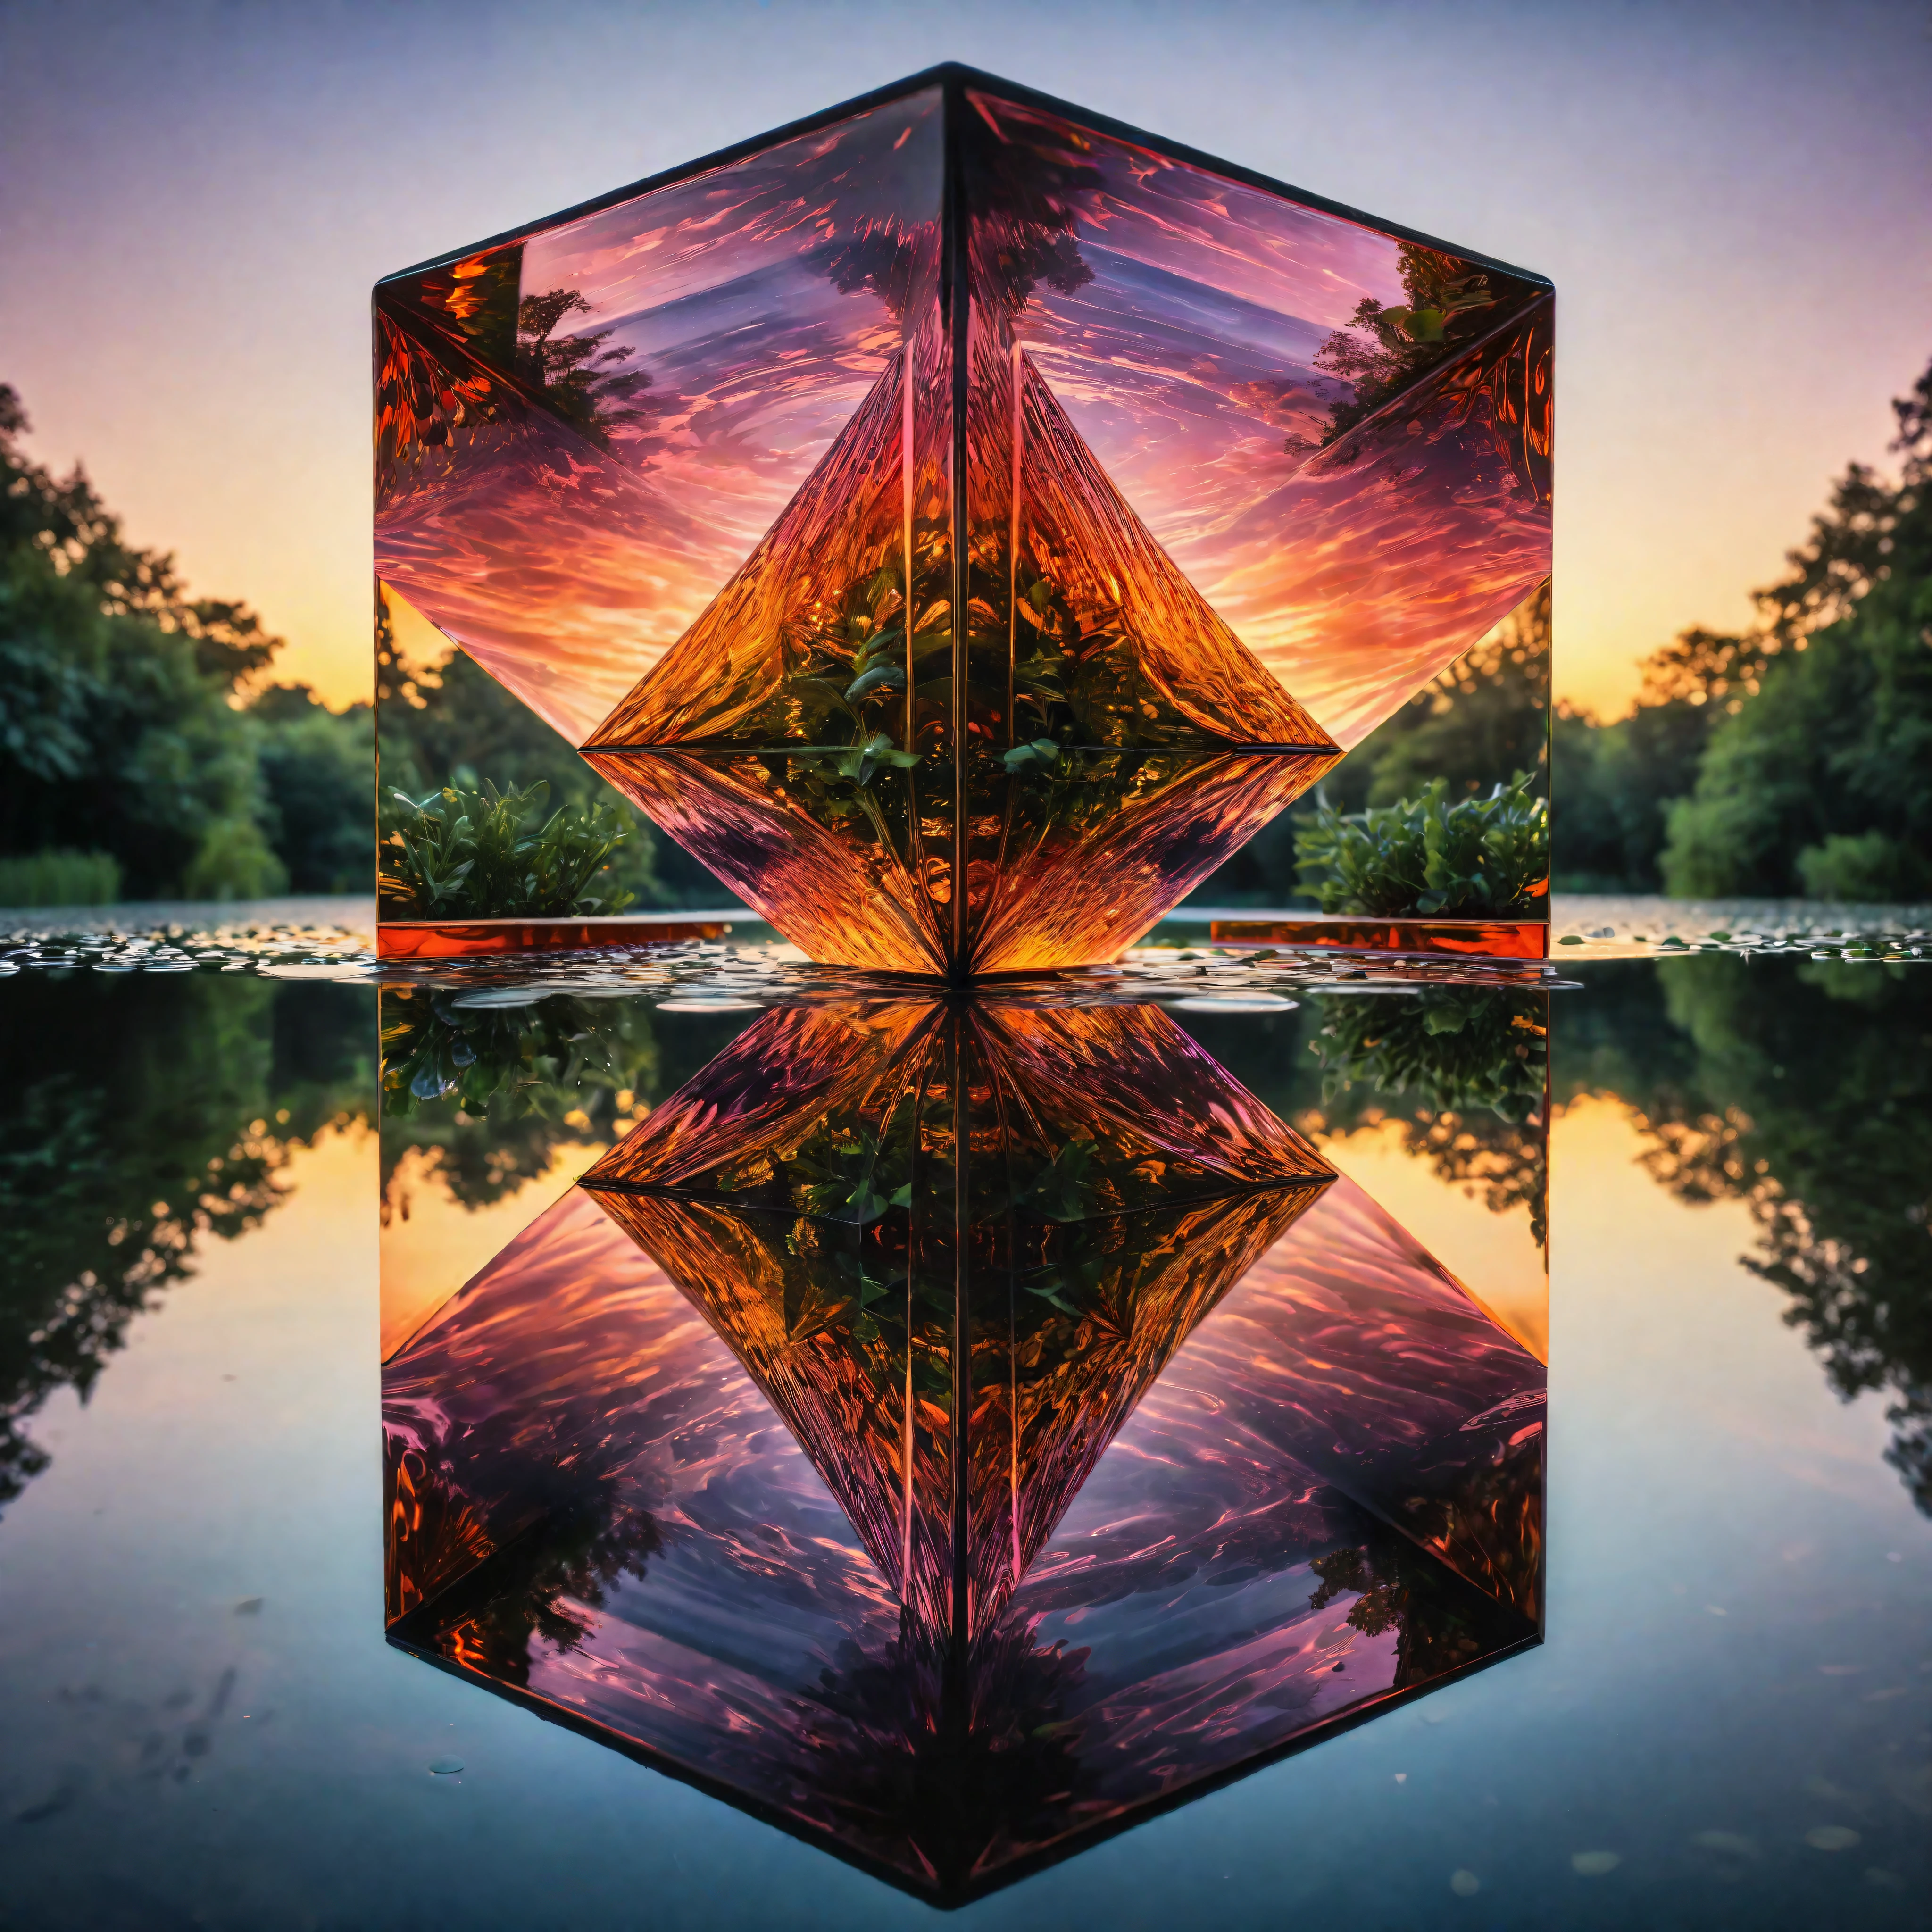 (best quality,4k,8k,highres,masterpiece:1.2),ultra-detailed,(realistic,photorealistic,photo-realistic:1.37),symmetry macro photography art,perfectly detailed reflections,symmetric cube,crystal clear pond,distorted reflections,sharp focus,shimmering water surface,meticulously captured details,vibrant colors,precise symmetry,mirror-like reflections,meticulously designed composition,divine precision,ethereal atmosphere,mind-bending symmetry,pure perfection,surreal beauty,luminous reflections,symmetrical masterpiece,spectacular precision,mesmerizing patterns,symmetrical harmony,flawless symmetry,mesmerizing artistry,visual symmetry feast,reflection perfection,intricate details,harmonious composition,awe-inspiring precision,masterfully captured reflections,vivid artistic details,impeccable symmetry,mind-blowing precision,perfectly balanced,mesmerizing optical illusion,meticulous craftsmanship